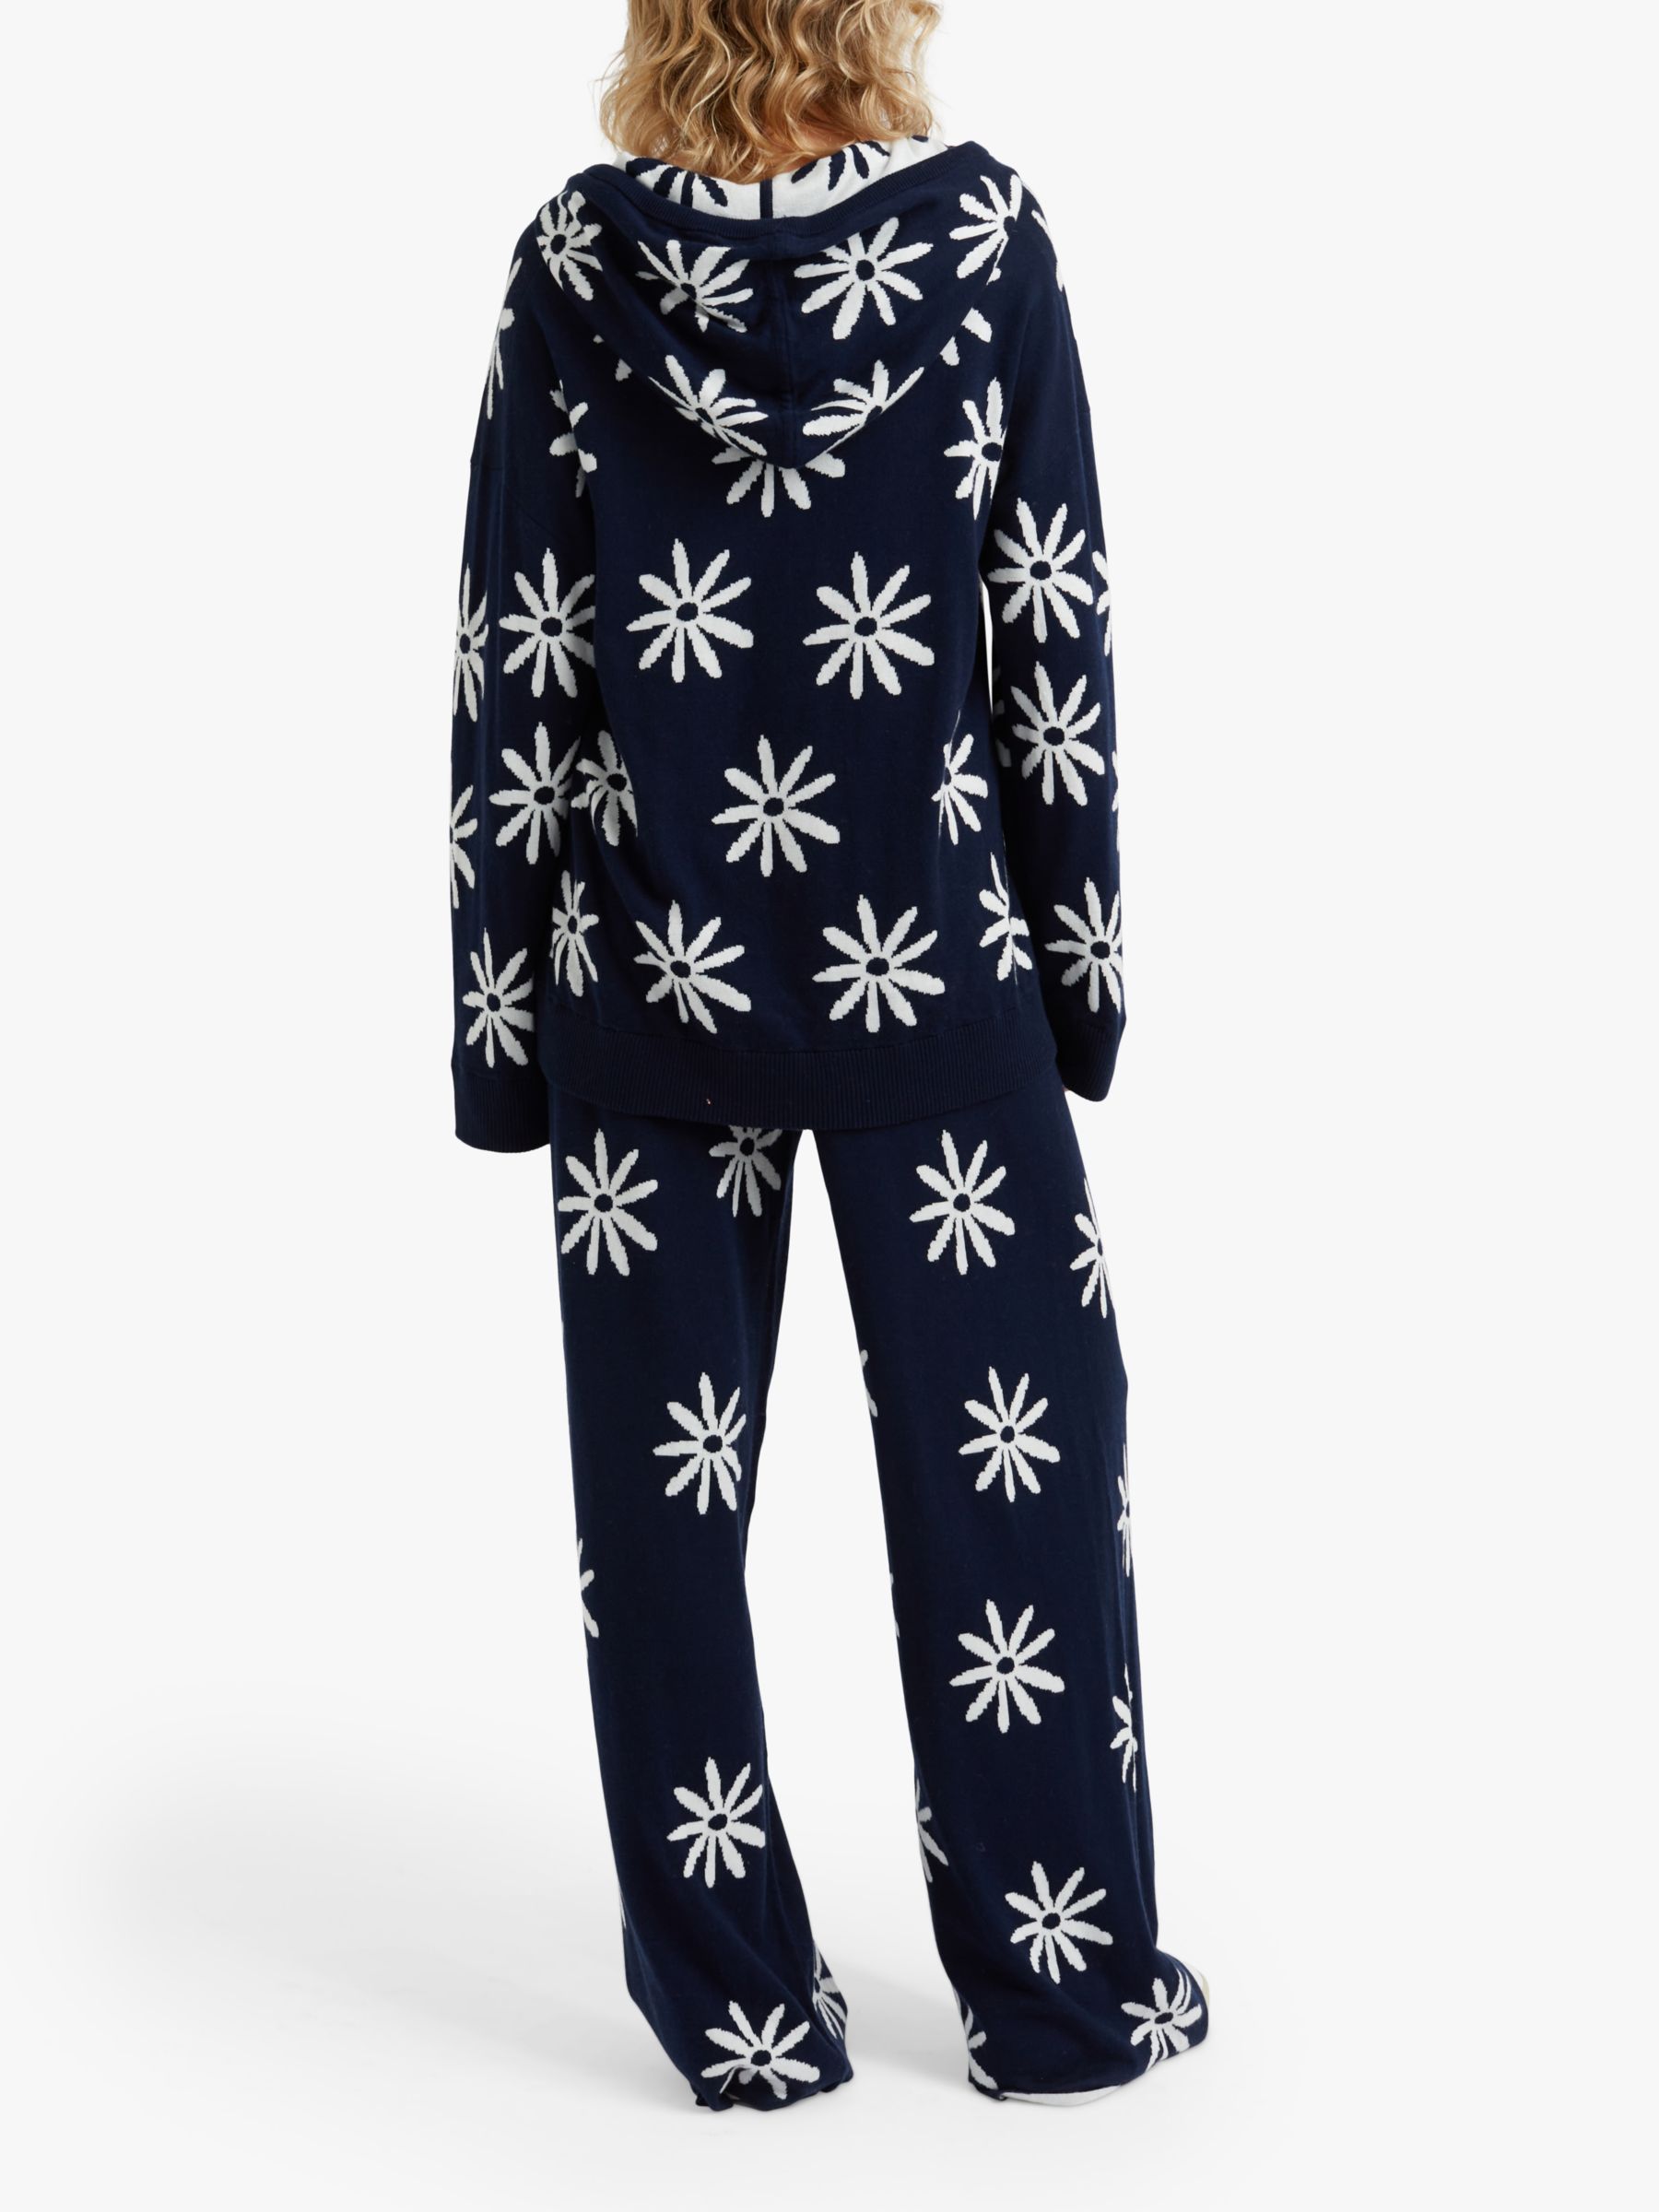 Chinti & Parker Ditsy Daisy Cashmere Blend Joggers, Deep Navy/Multi, XS